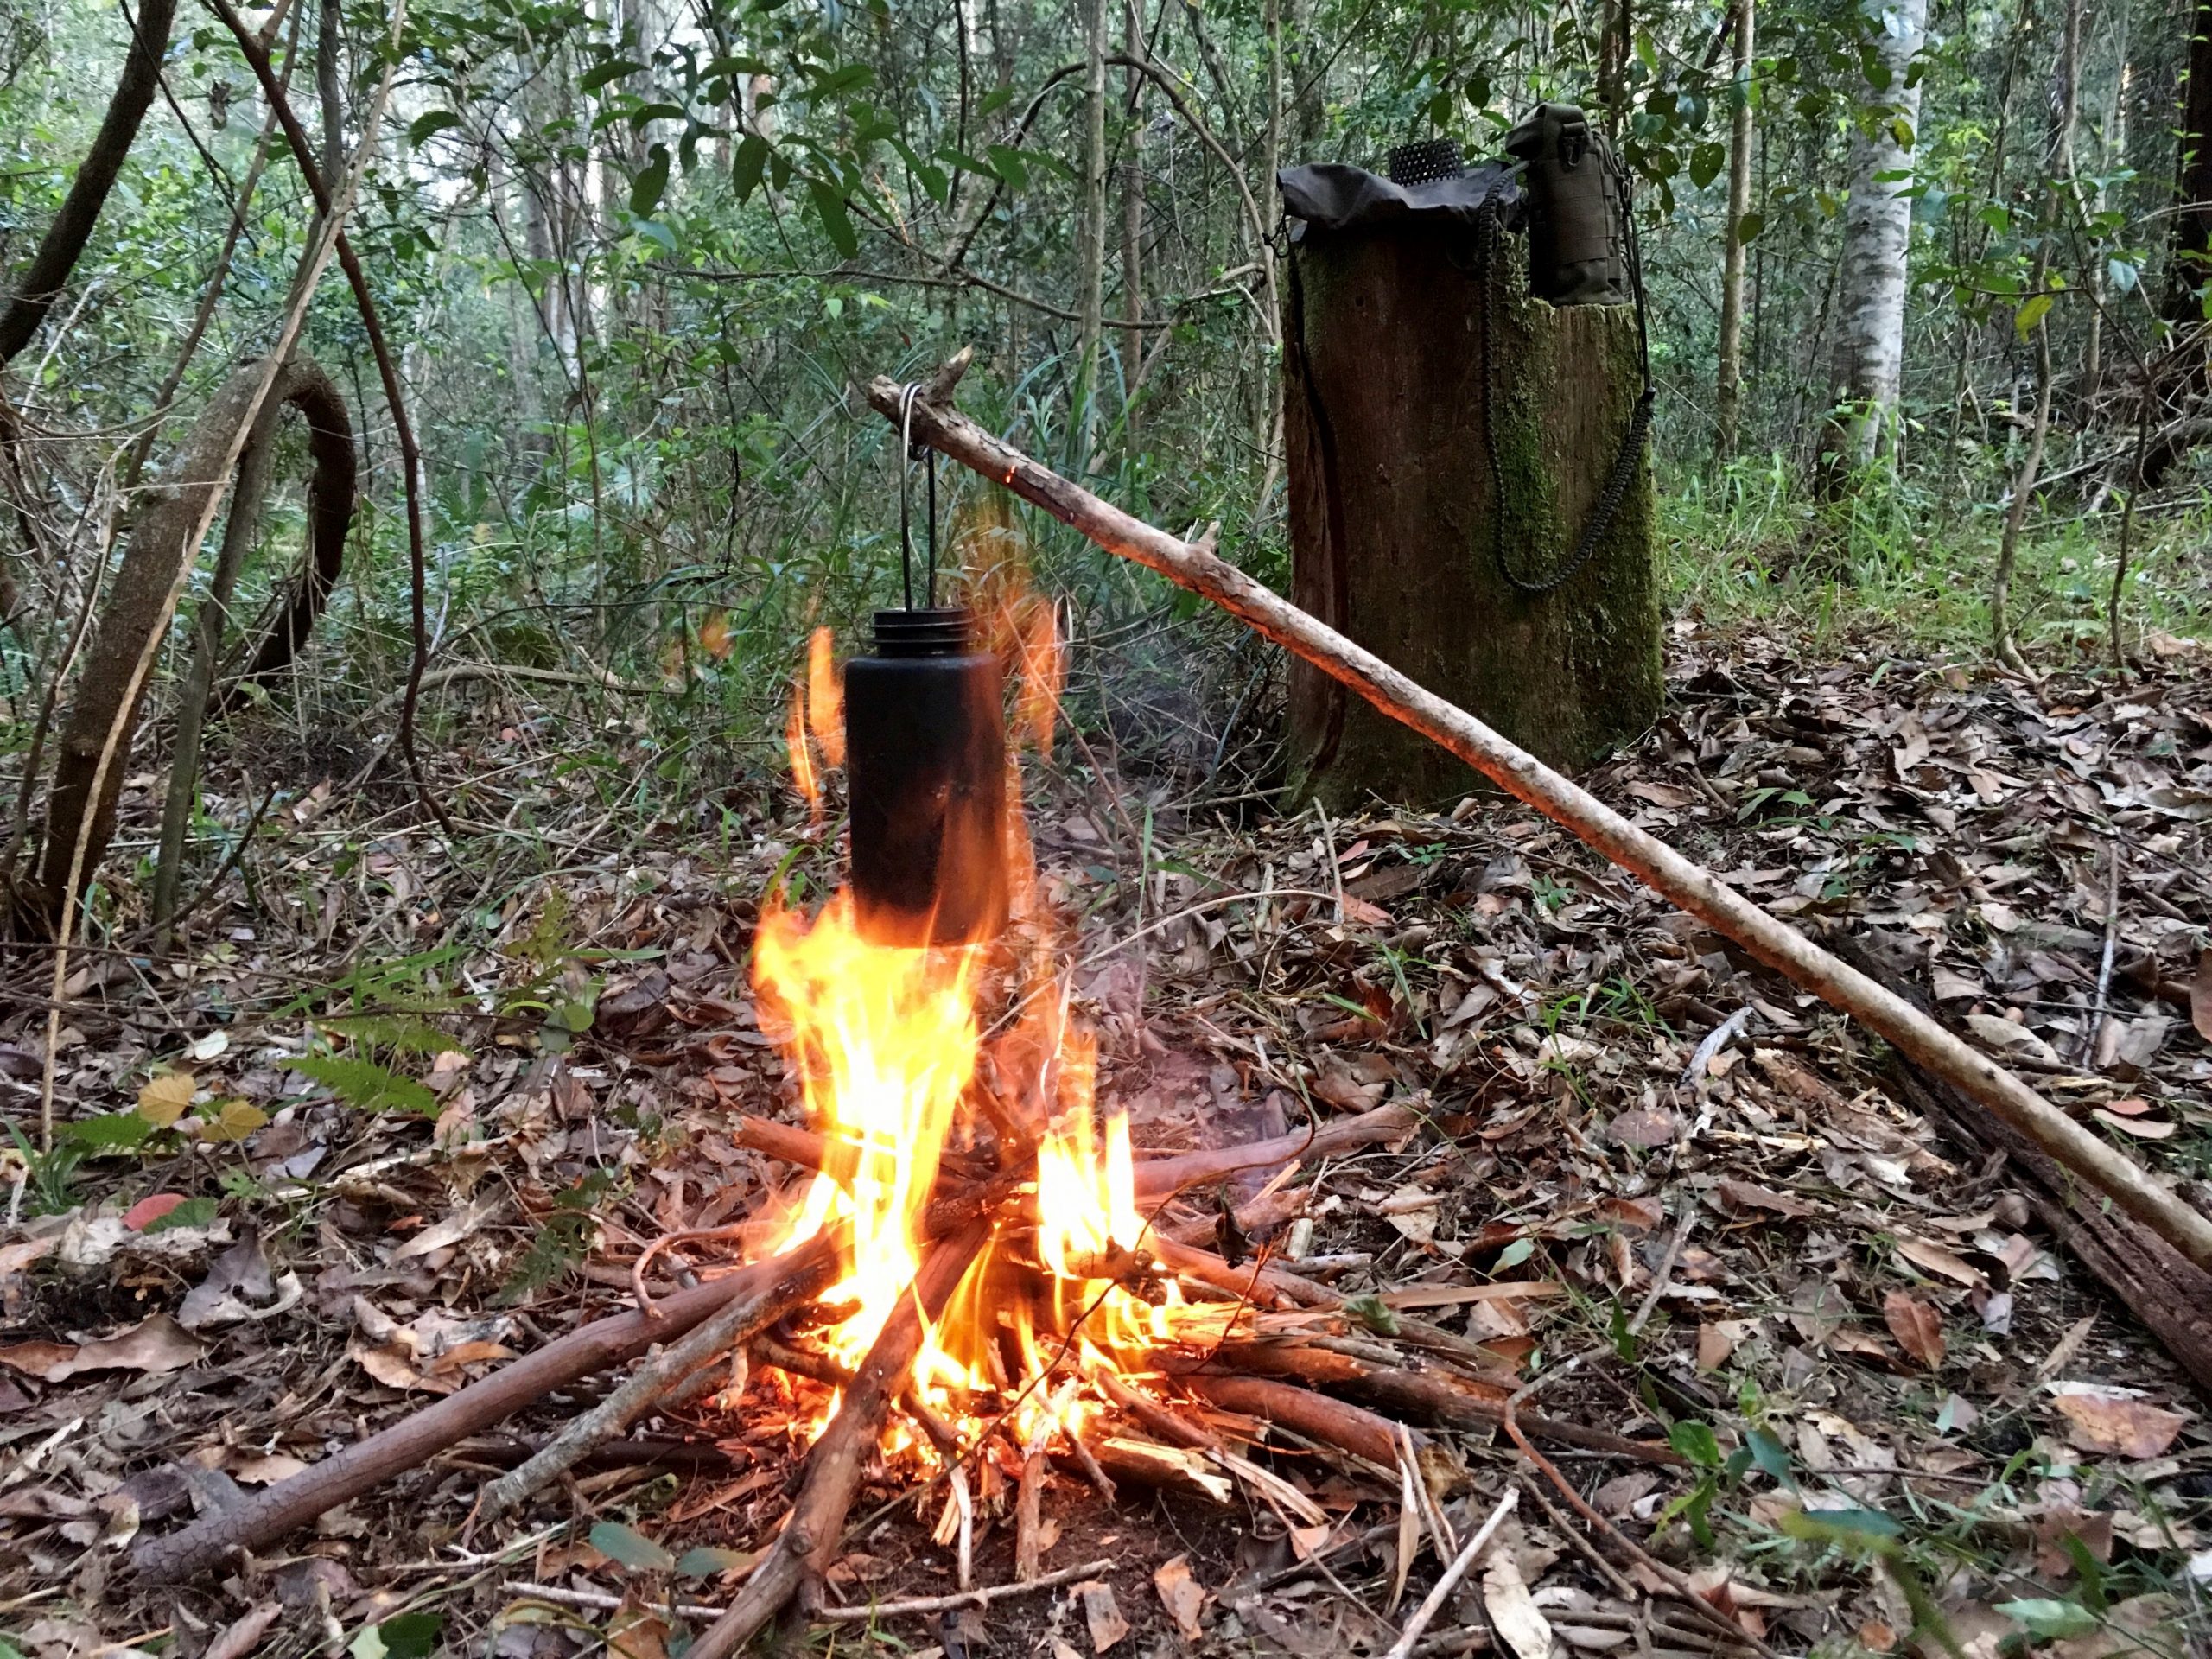 Cooking pot hanging over a small campfire in bush surrounds